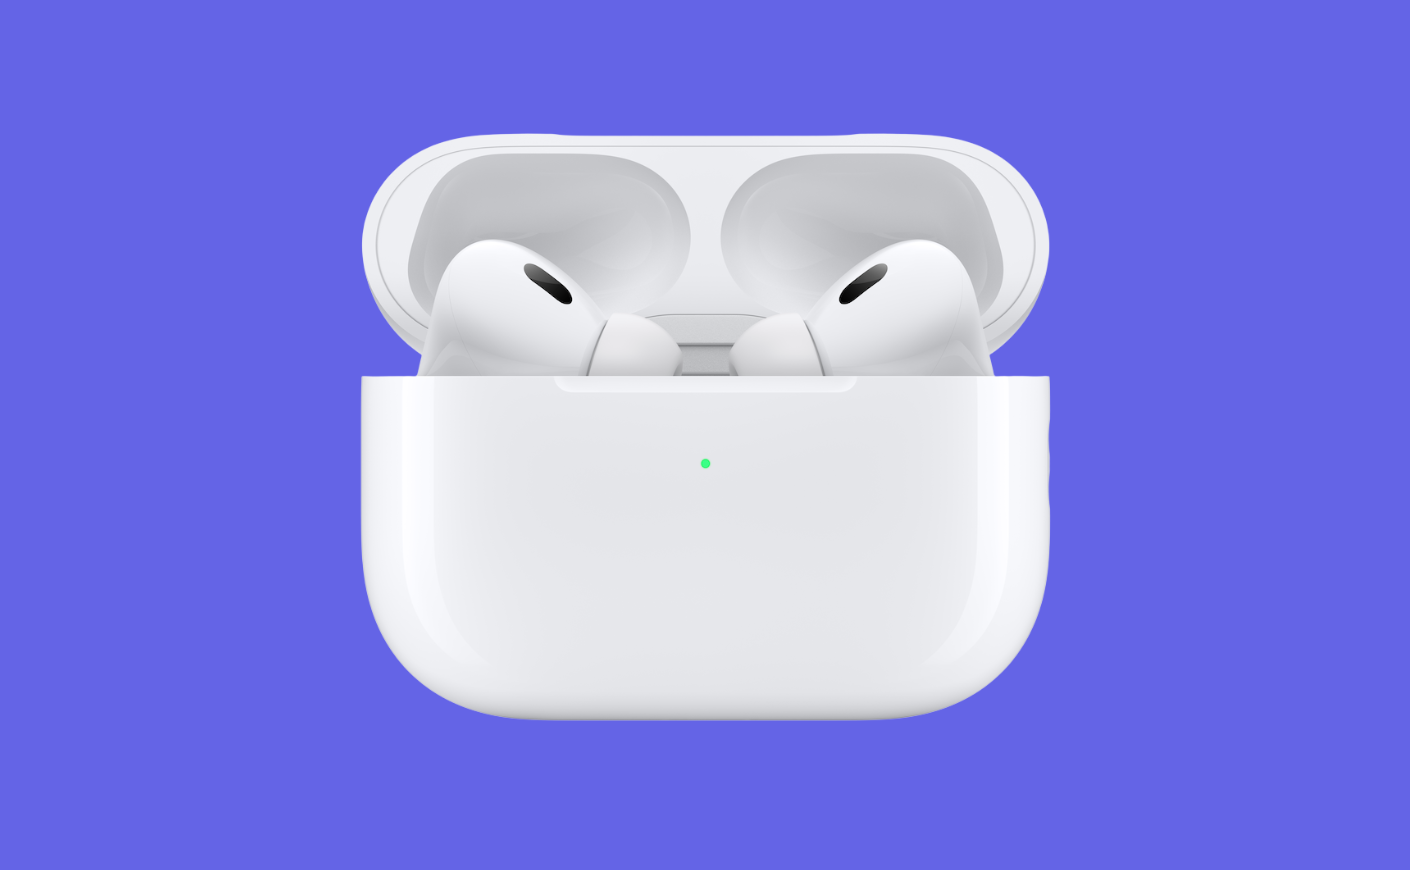 new apple airpods pro against purple background